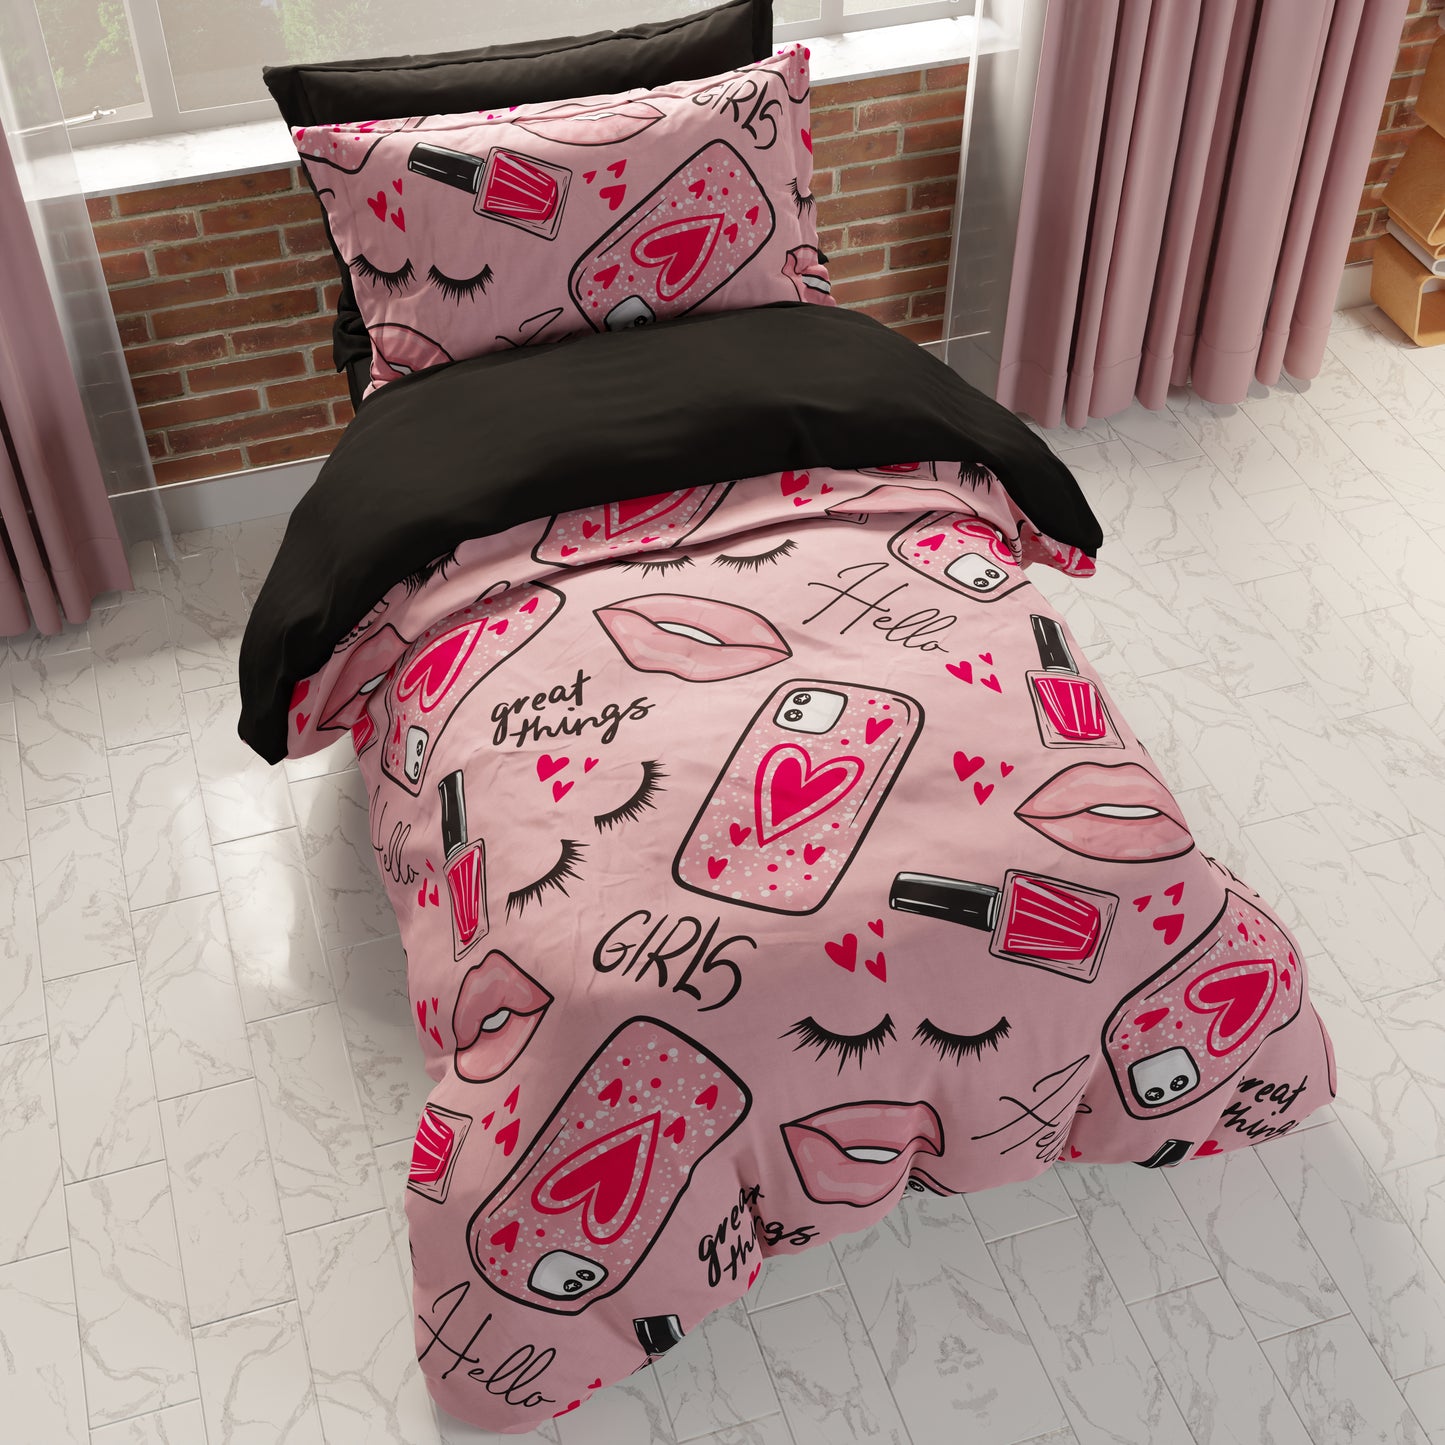 Duvet Cover, Bedroom Duvet Cover, Single and Queen Size, Pink Lipstick